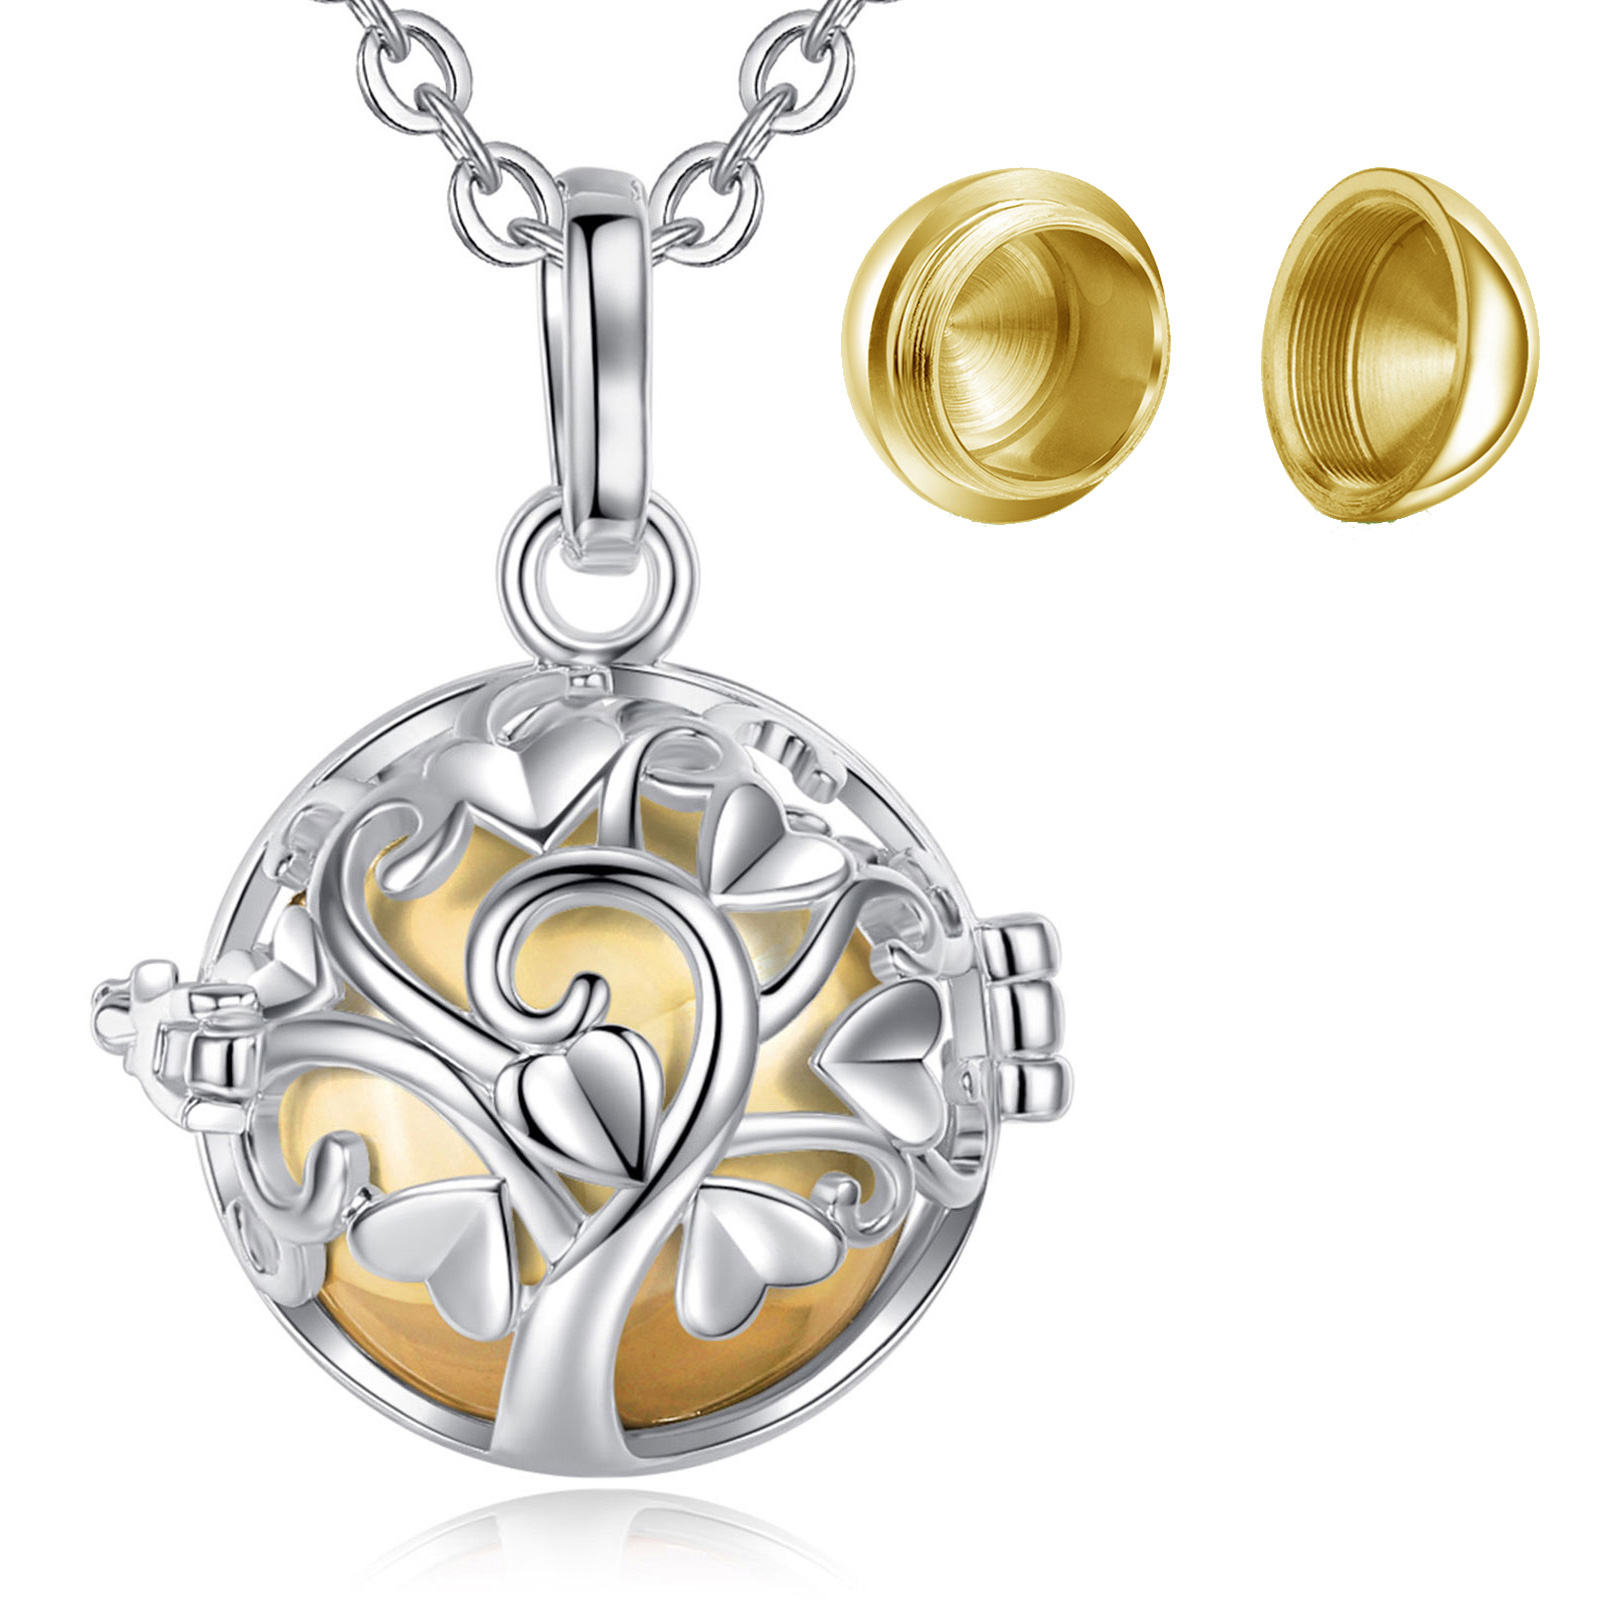 Merryshine Hollow Cage Memorial Keepsake Cremation Jewelry Wholesale Dog Urn Necklaces for Ashes